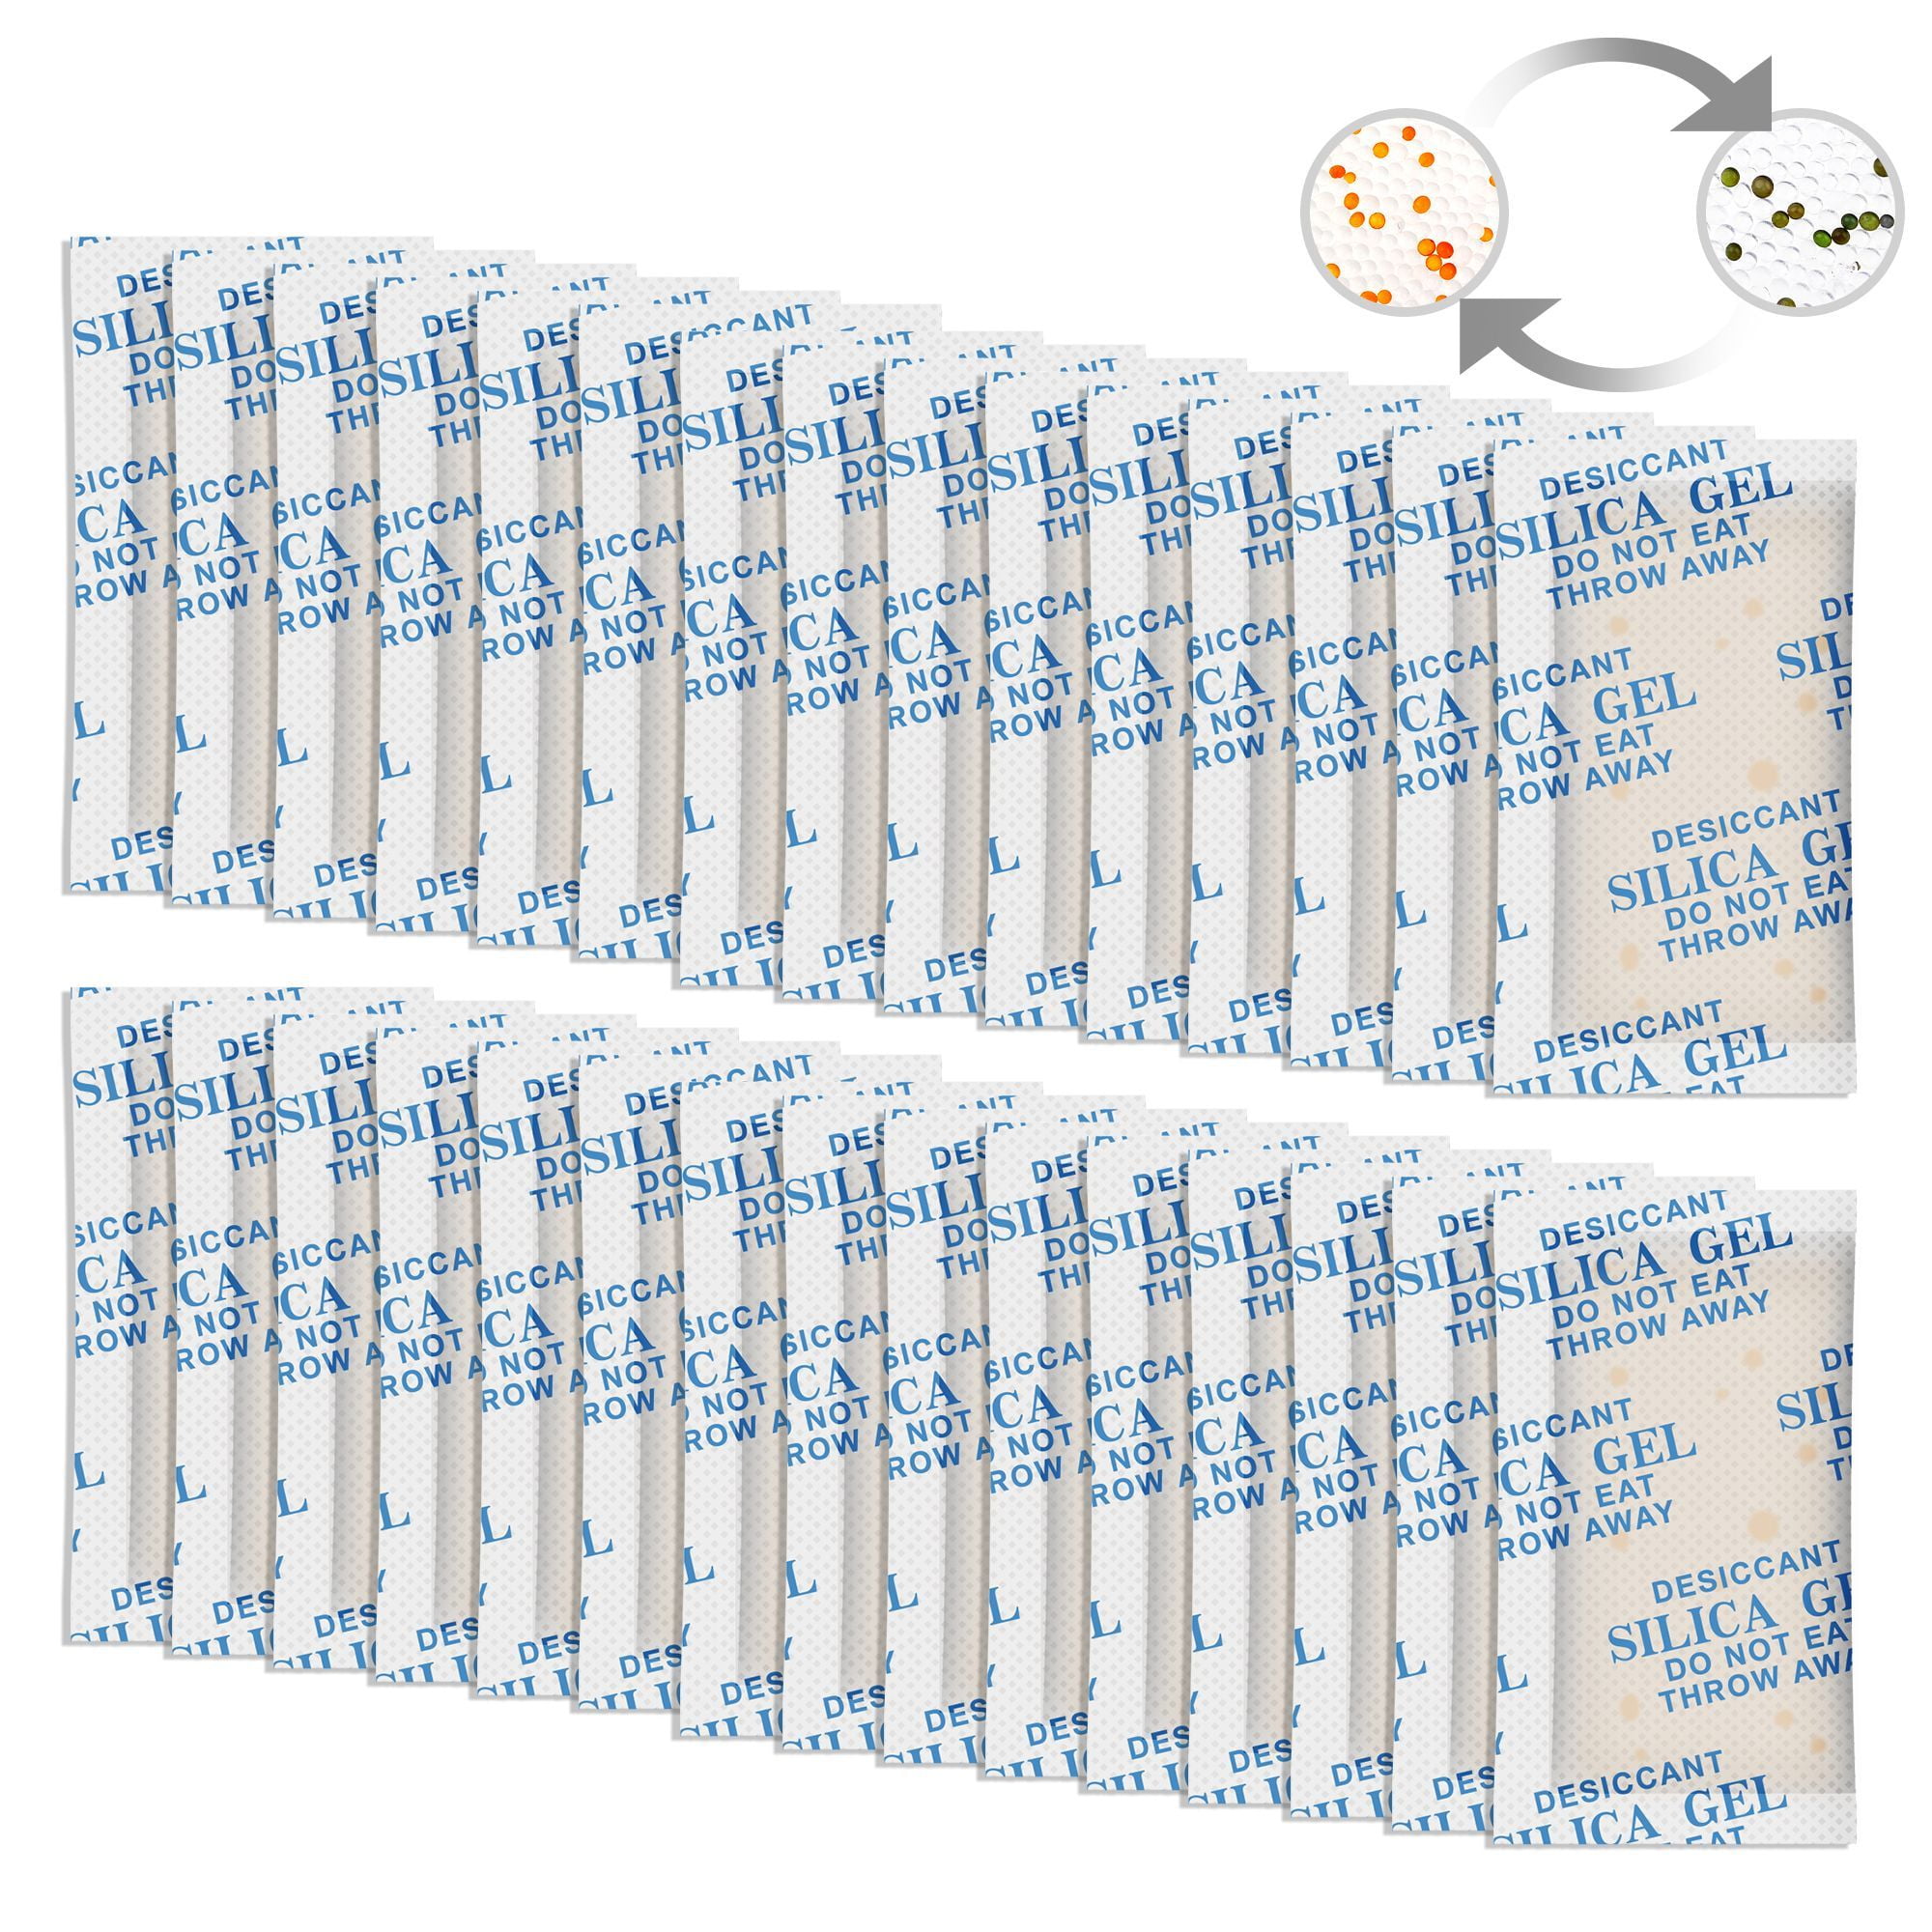 LotFancy Silica Gel Packets, 300 Packs 0.5 Gram, Indicating Desiccant  Dehumidifier Packets, Moisture Absorber Bags for Spices Jewelry Shoes